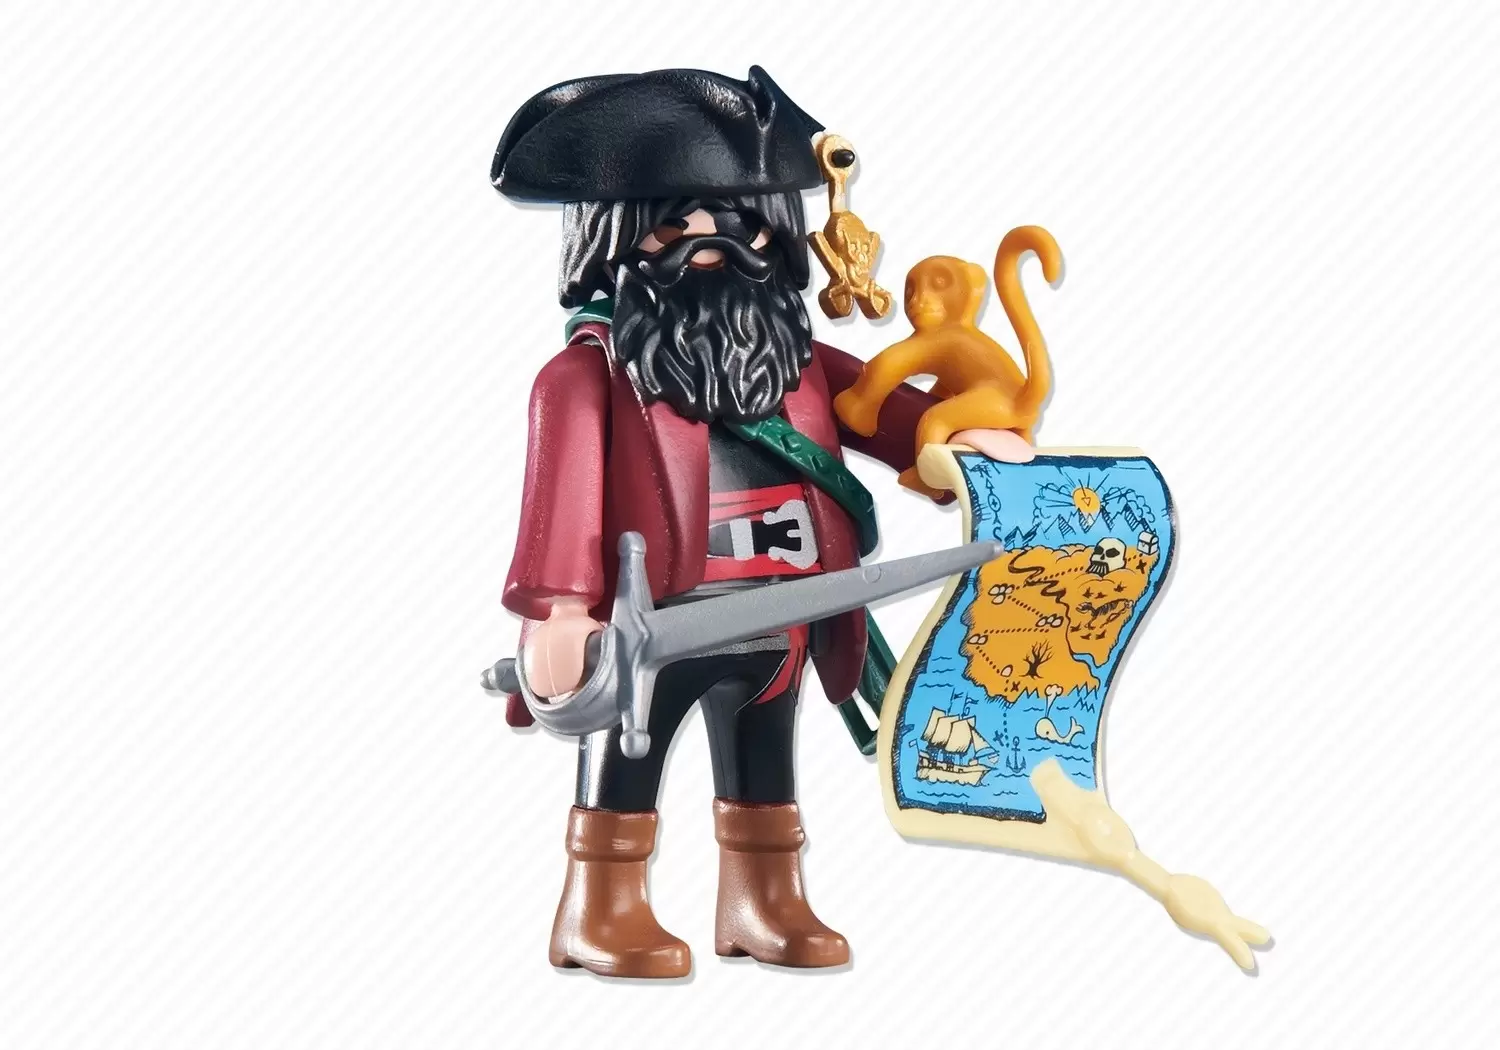 Pirate Playmobil - Pirate Captain with Map